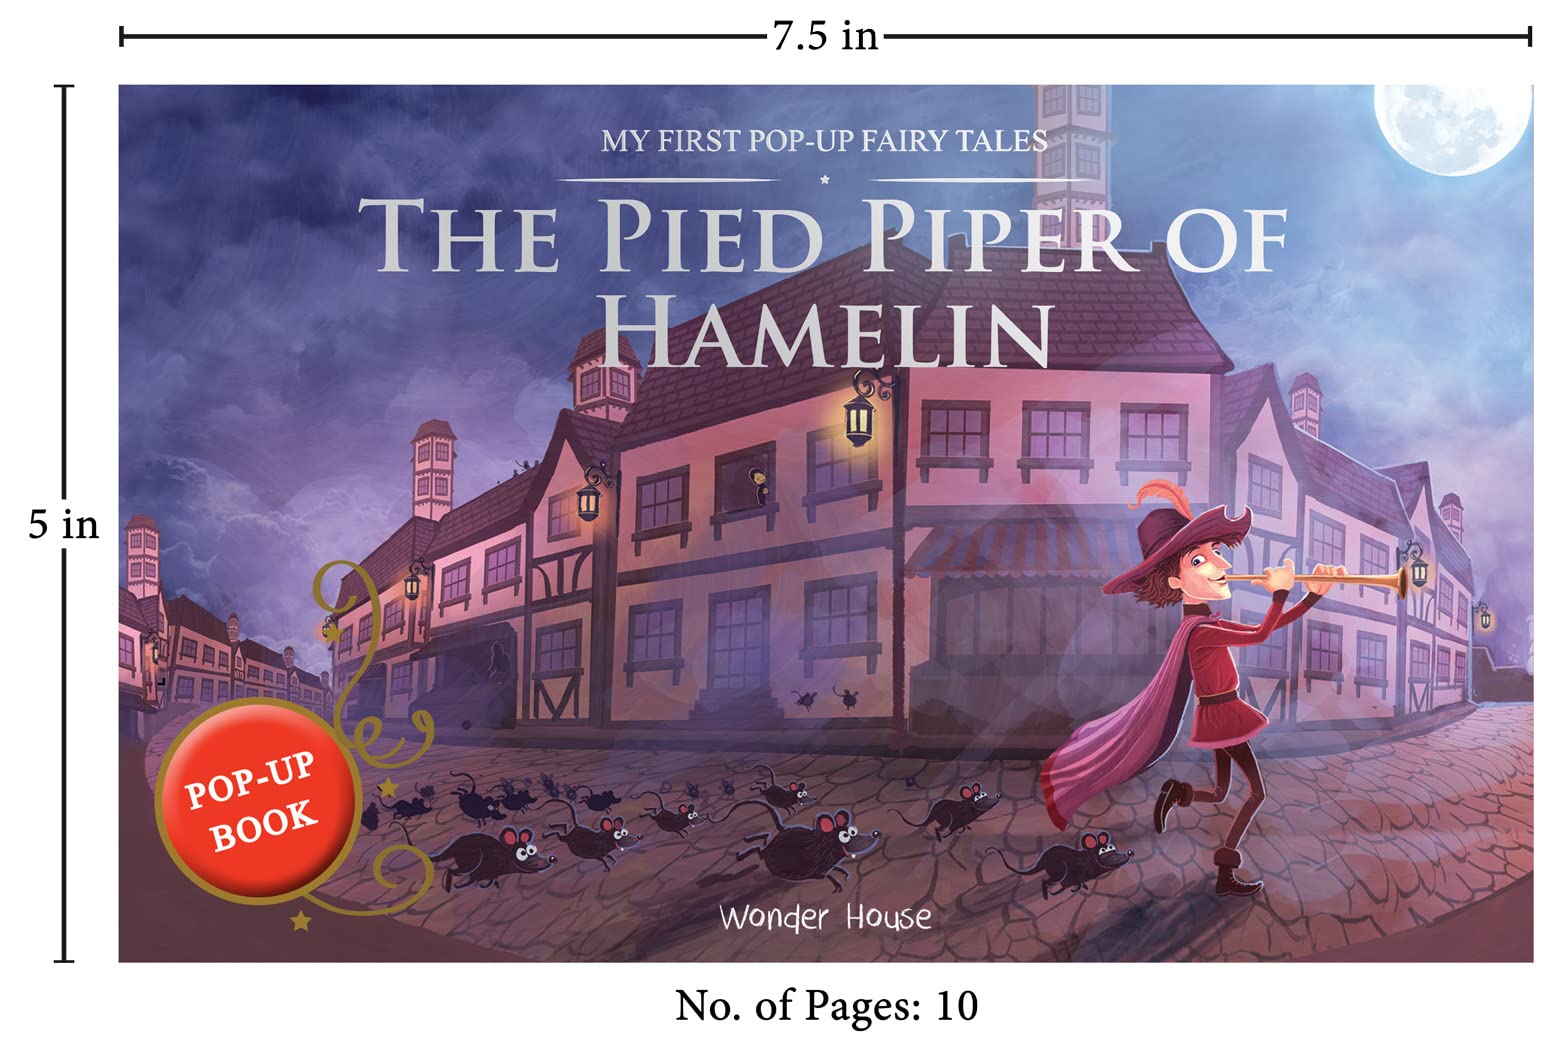 My First Pop-Up Fairy Tales - Pied Piper of Hamelin